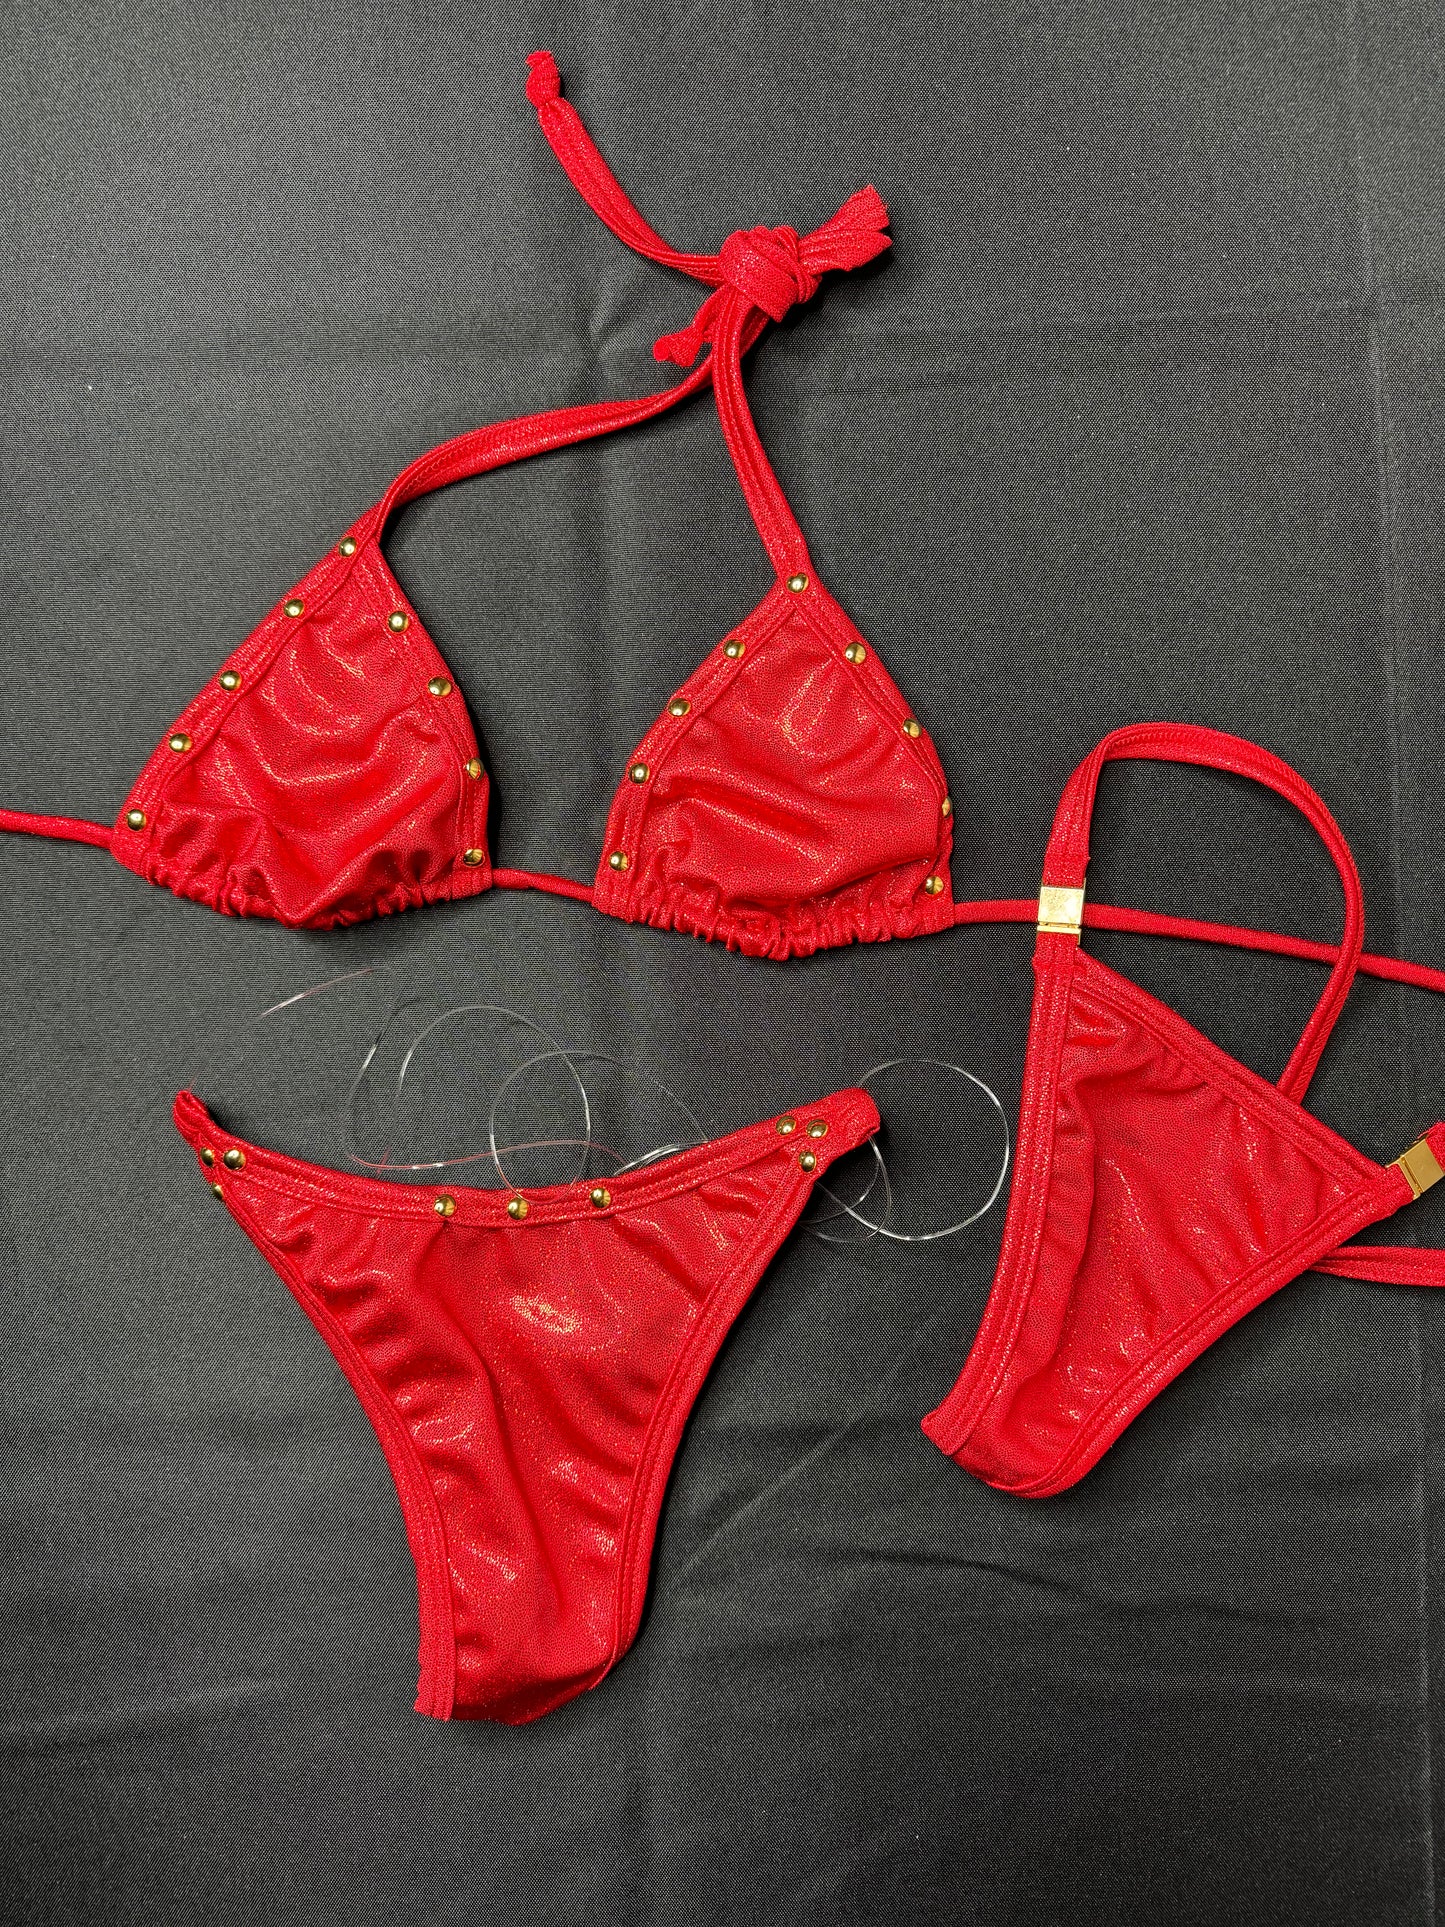 red two-piece bikini stripper outfit